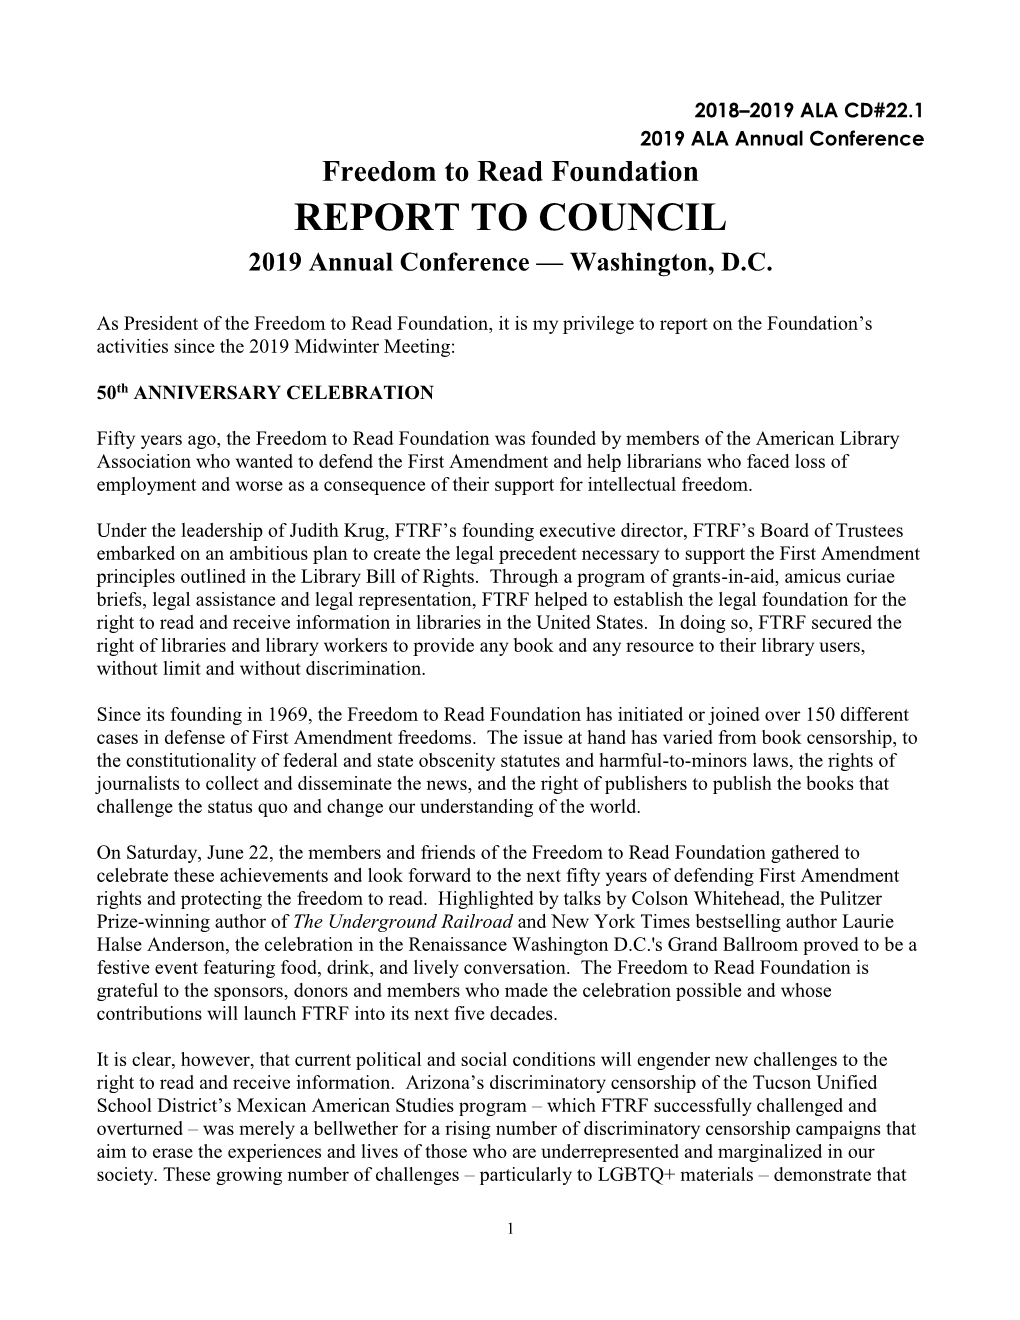 Freedom to Read Foundation REPORT to COUNCIL 2019 Annual Conference — Washington, D.C